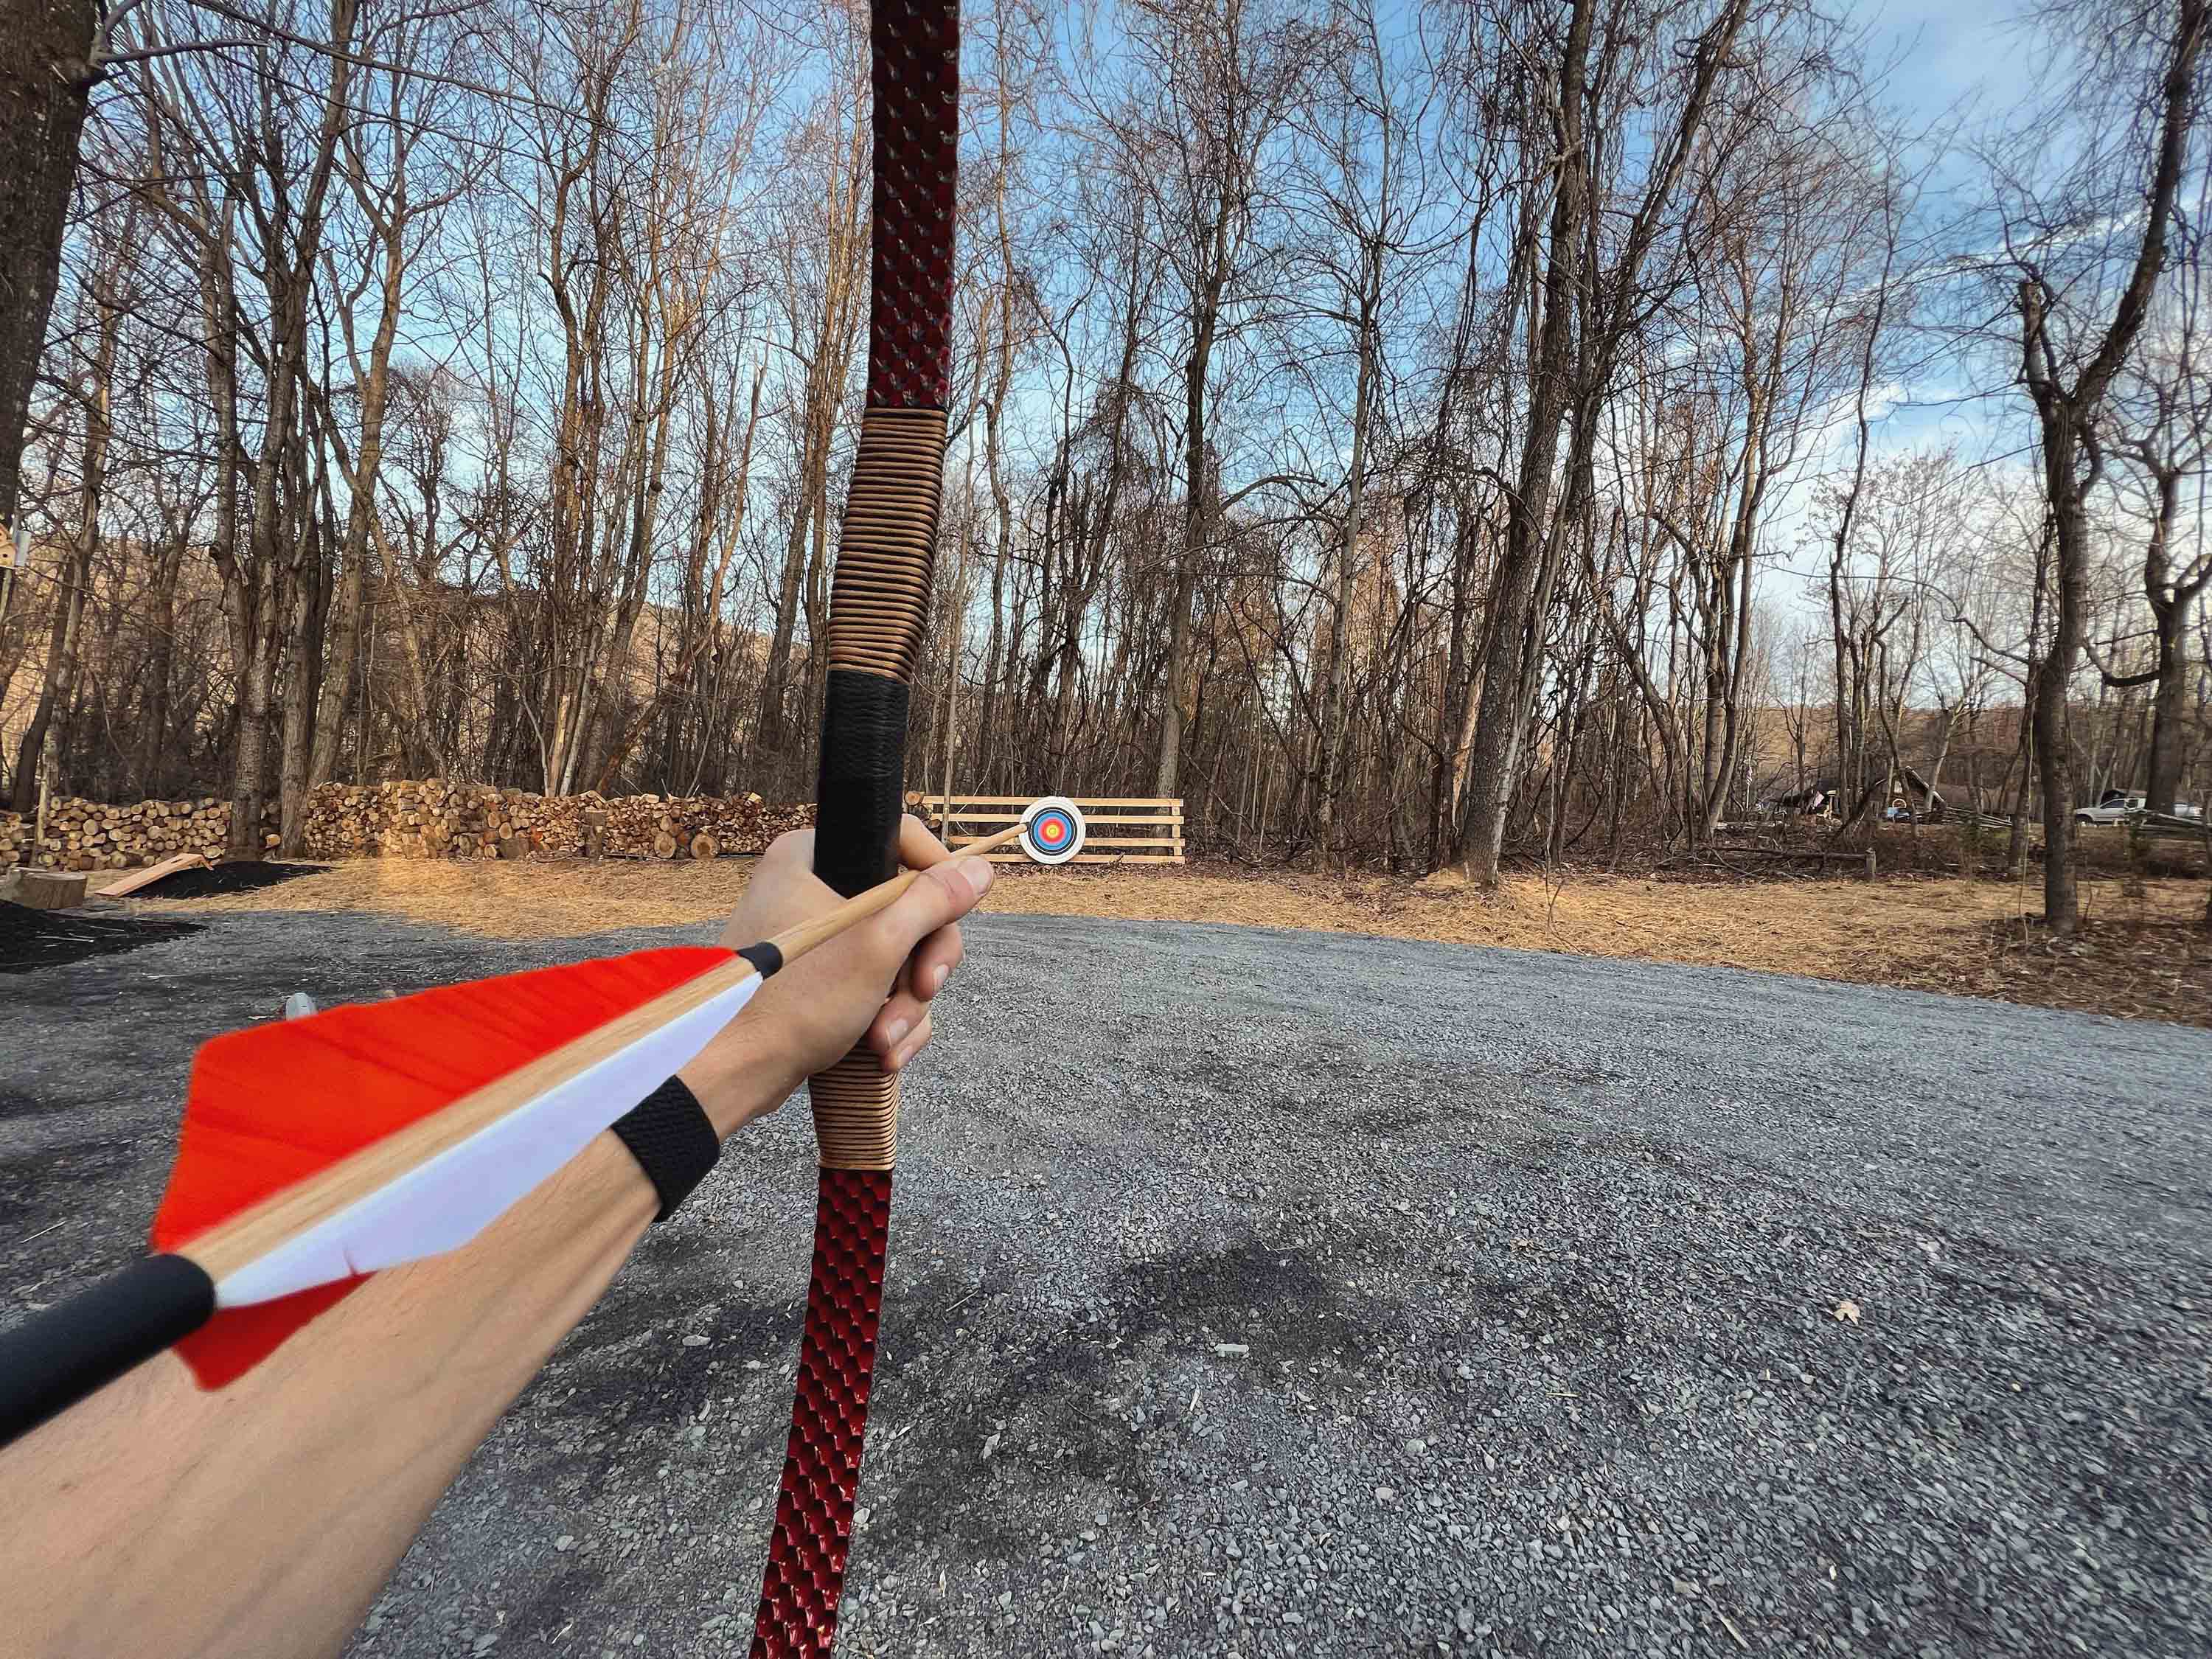 <span  class="uc_style_uc_tiles_grid_image_elementor_uc_items_attribute_title" style="color:#ffffff;">Archery with Kainokai traditional handmade recurve longbow (40 pounds)</span>